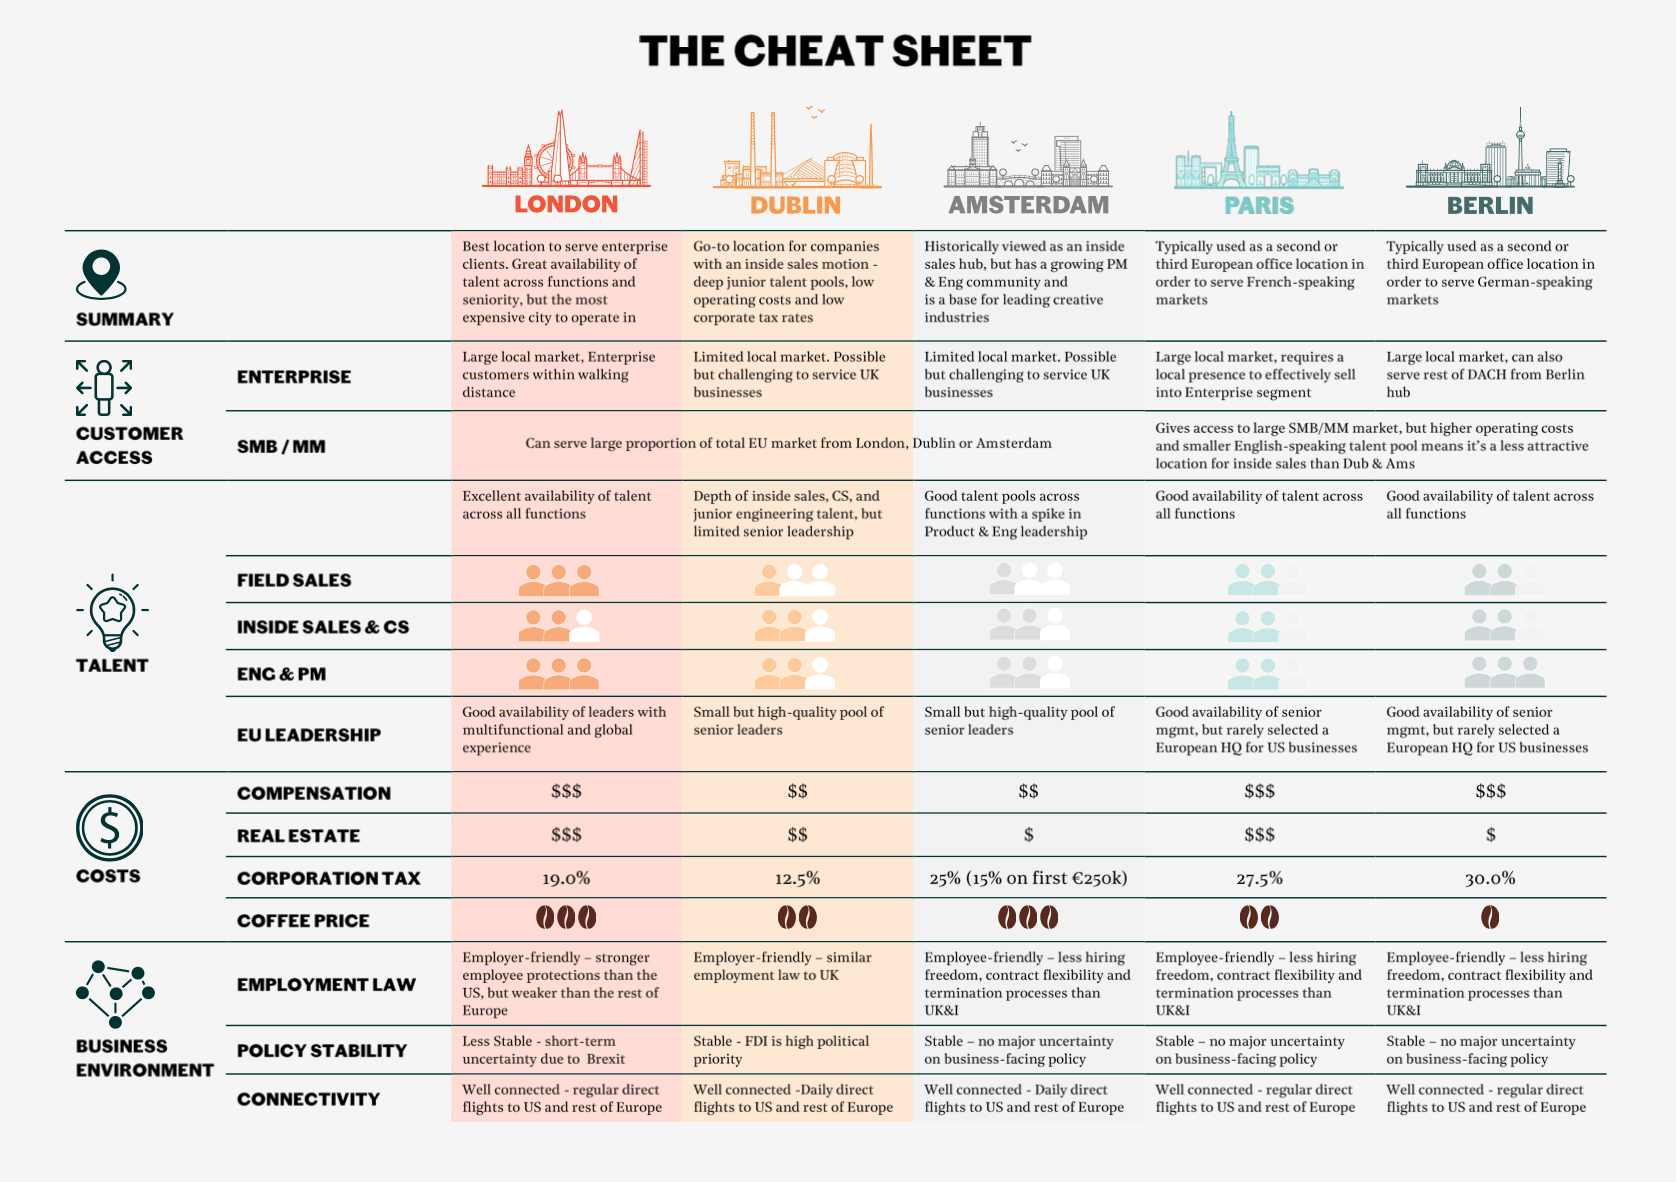 Where To Land, Cheat Sheet, Frontline Ventures